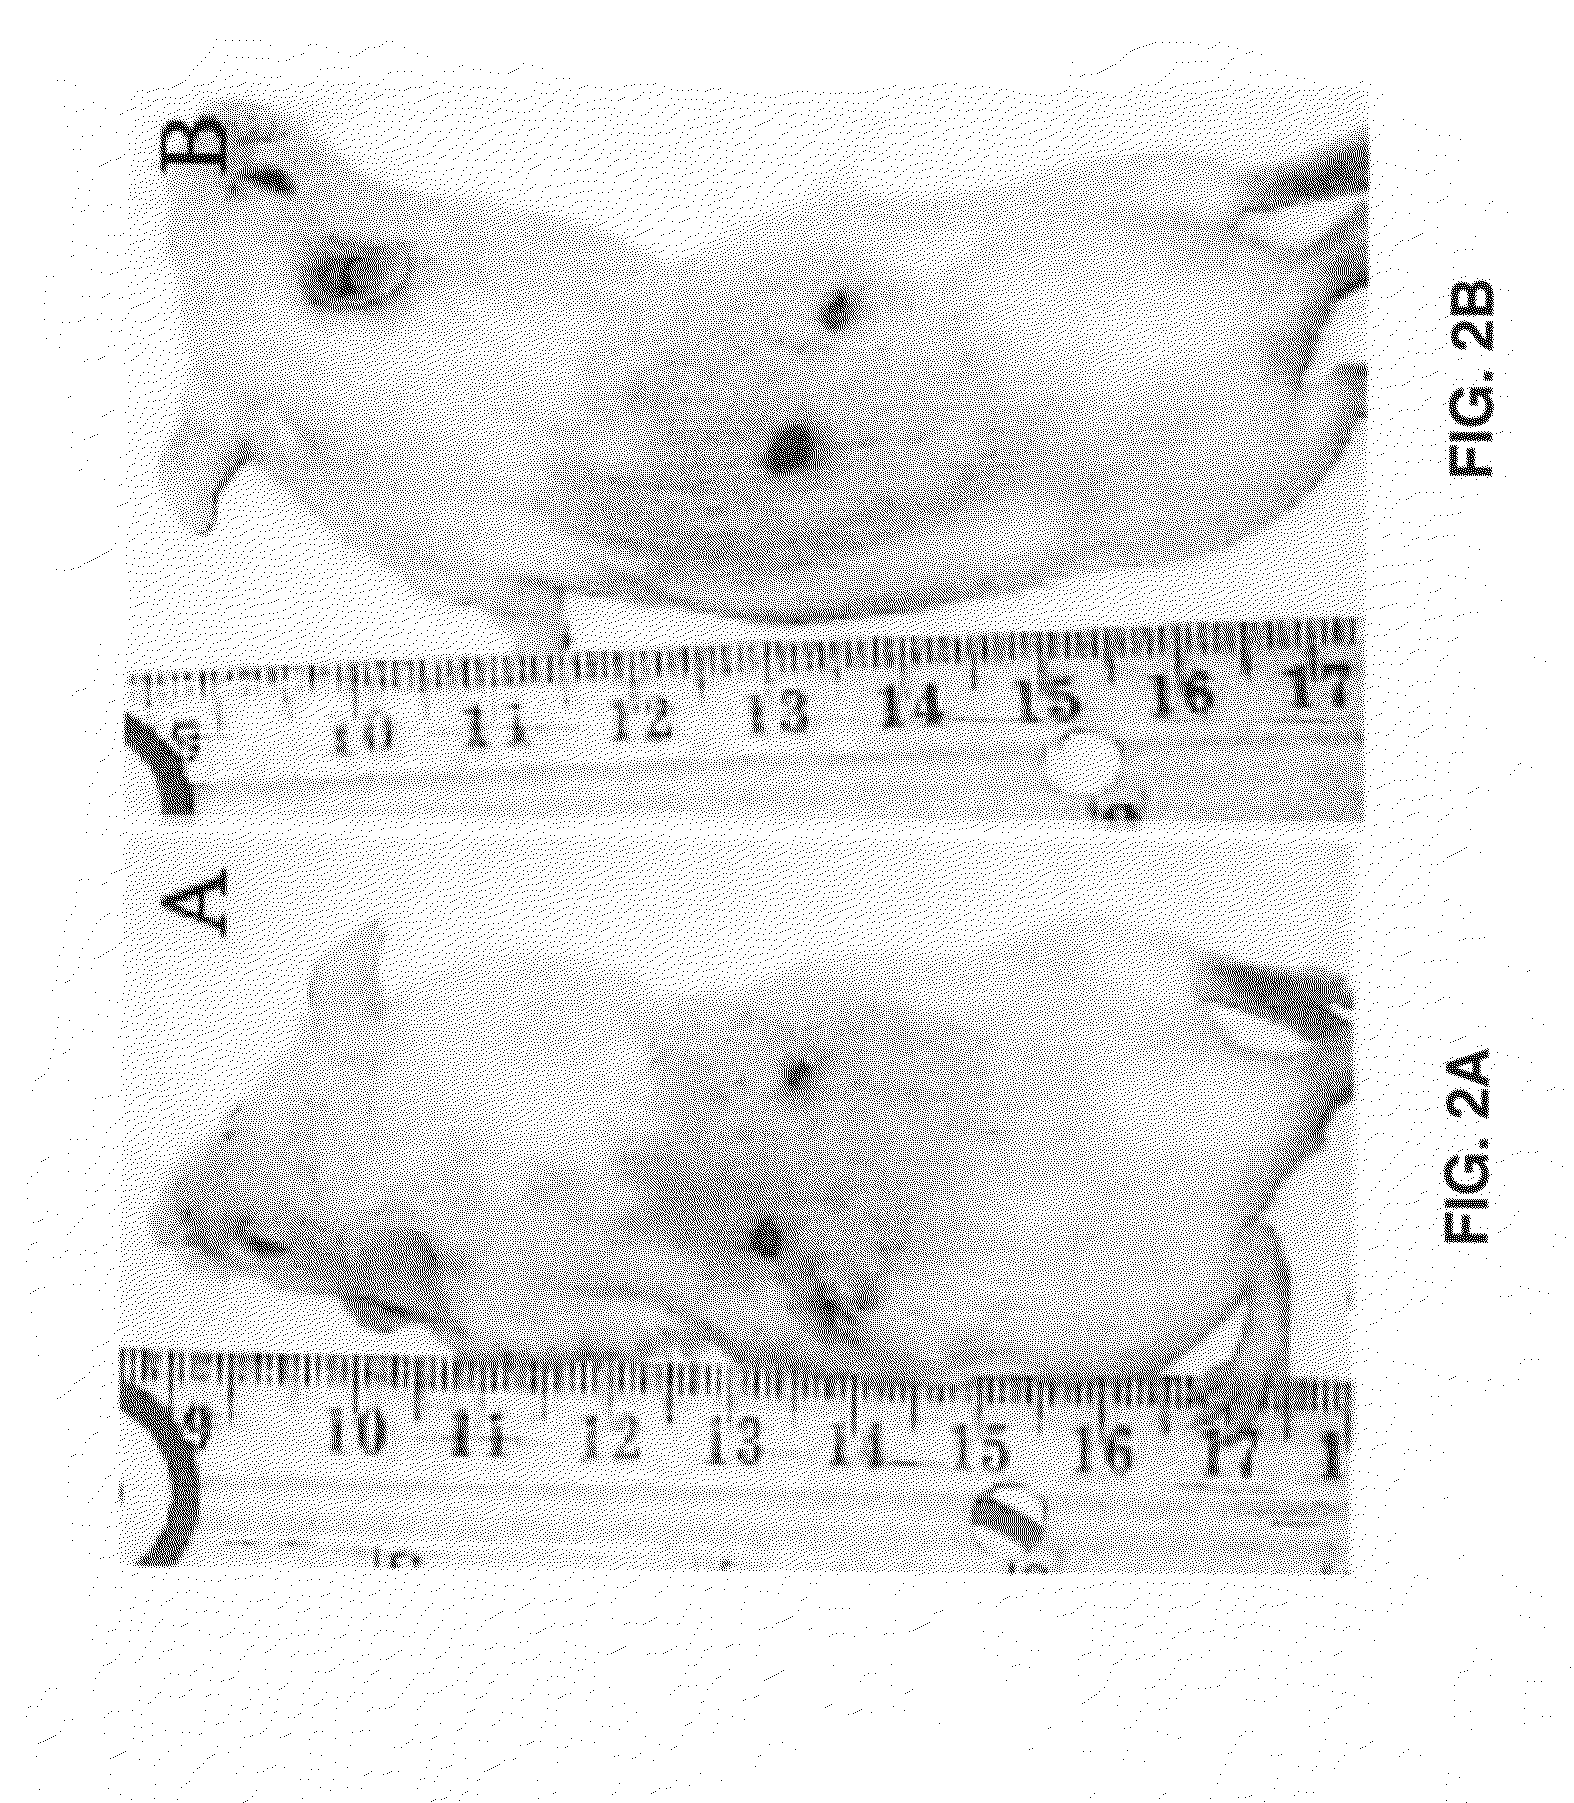 Ocular compositions containing dioleoylphosphatidylglycerol and uses thereof